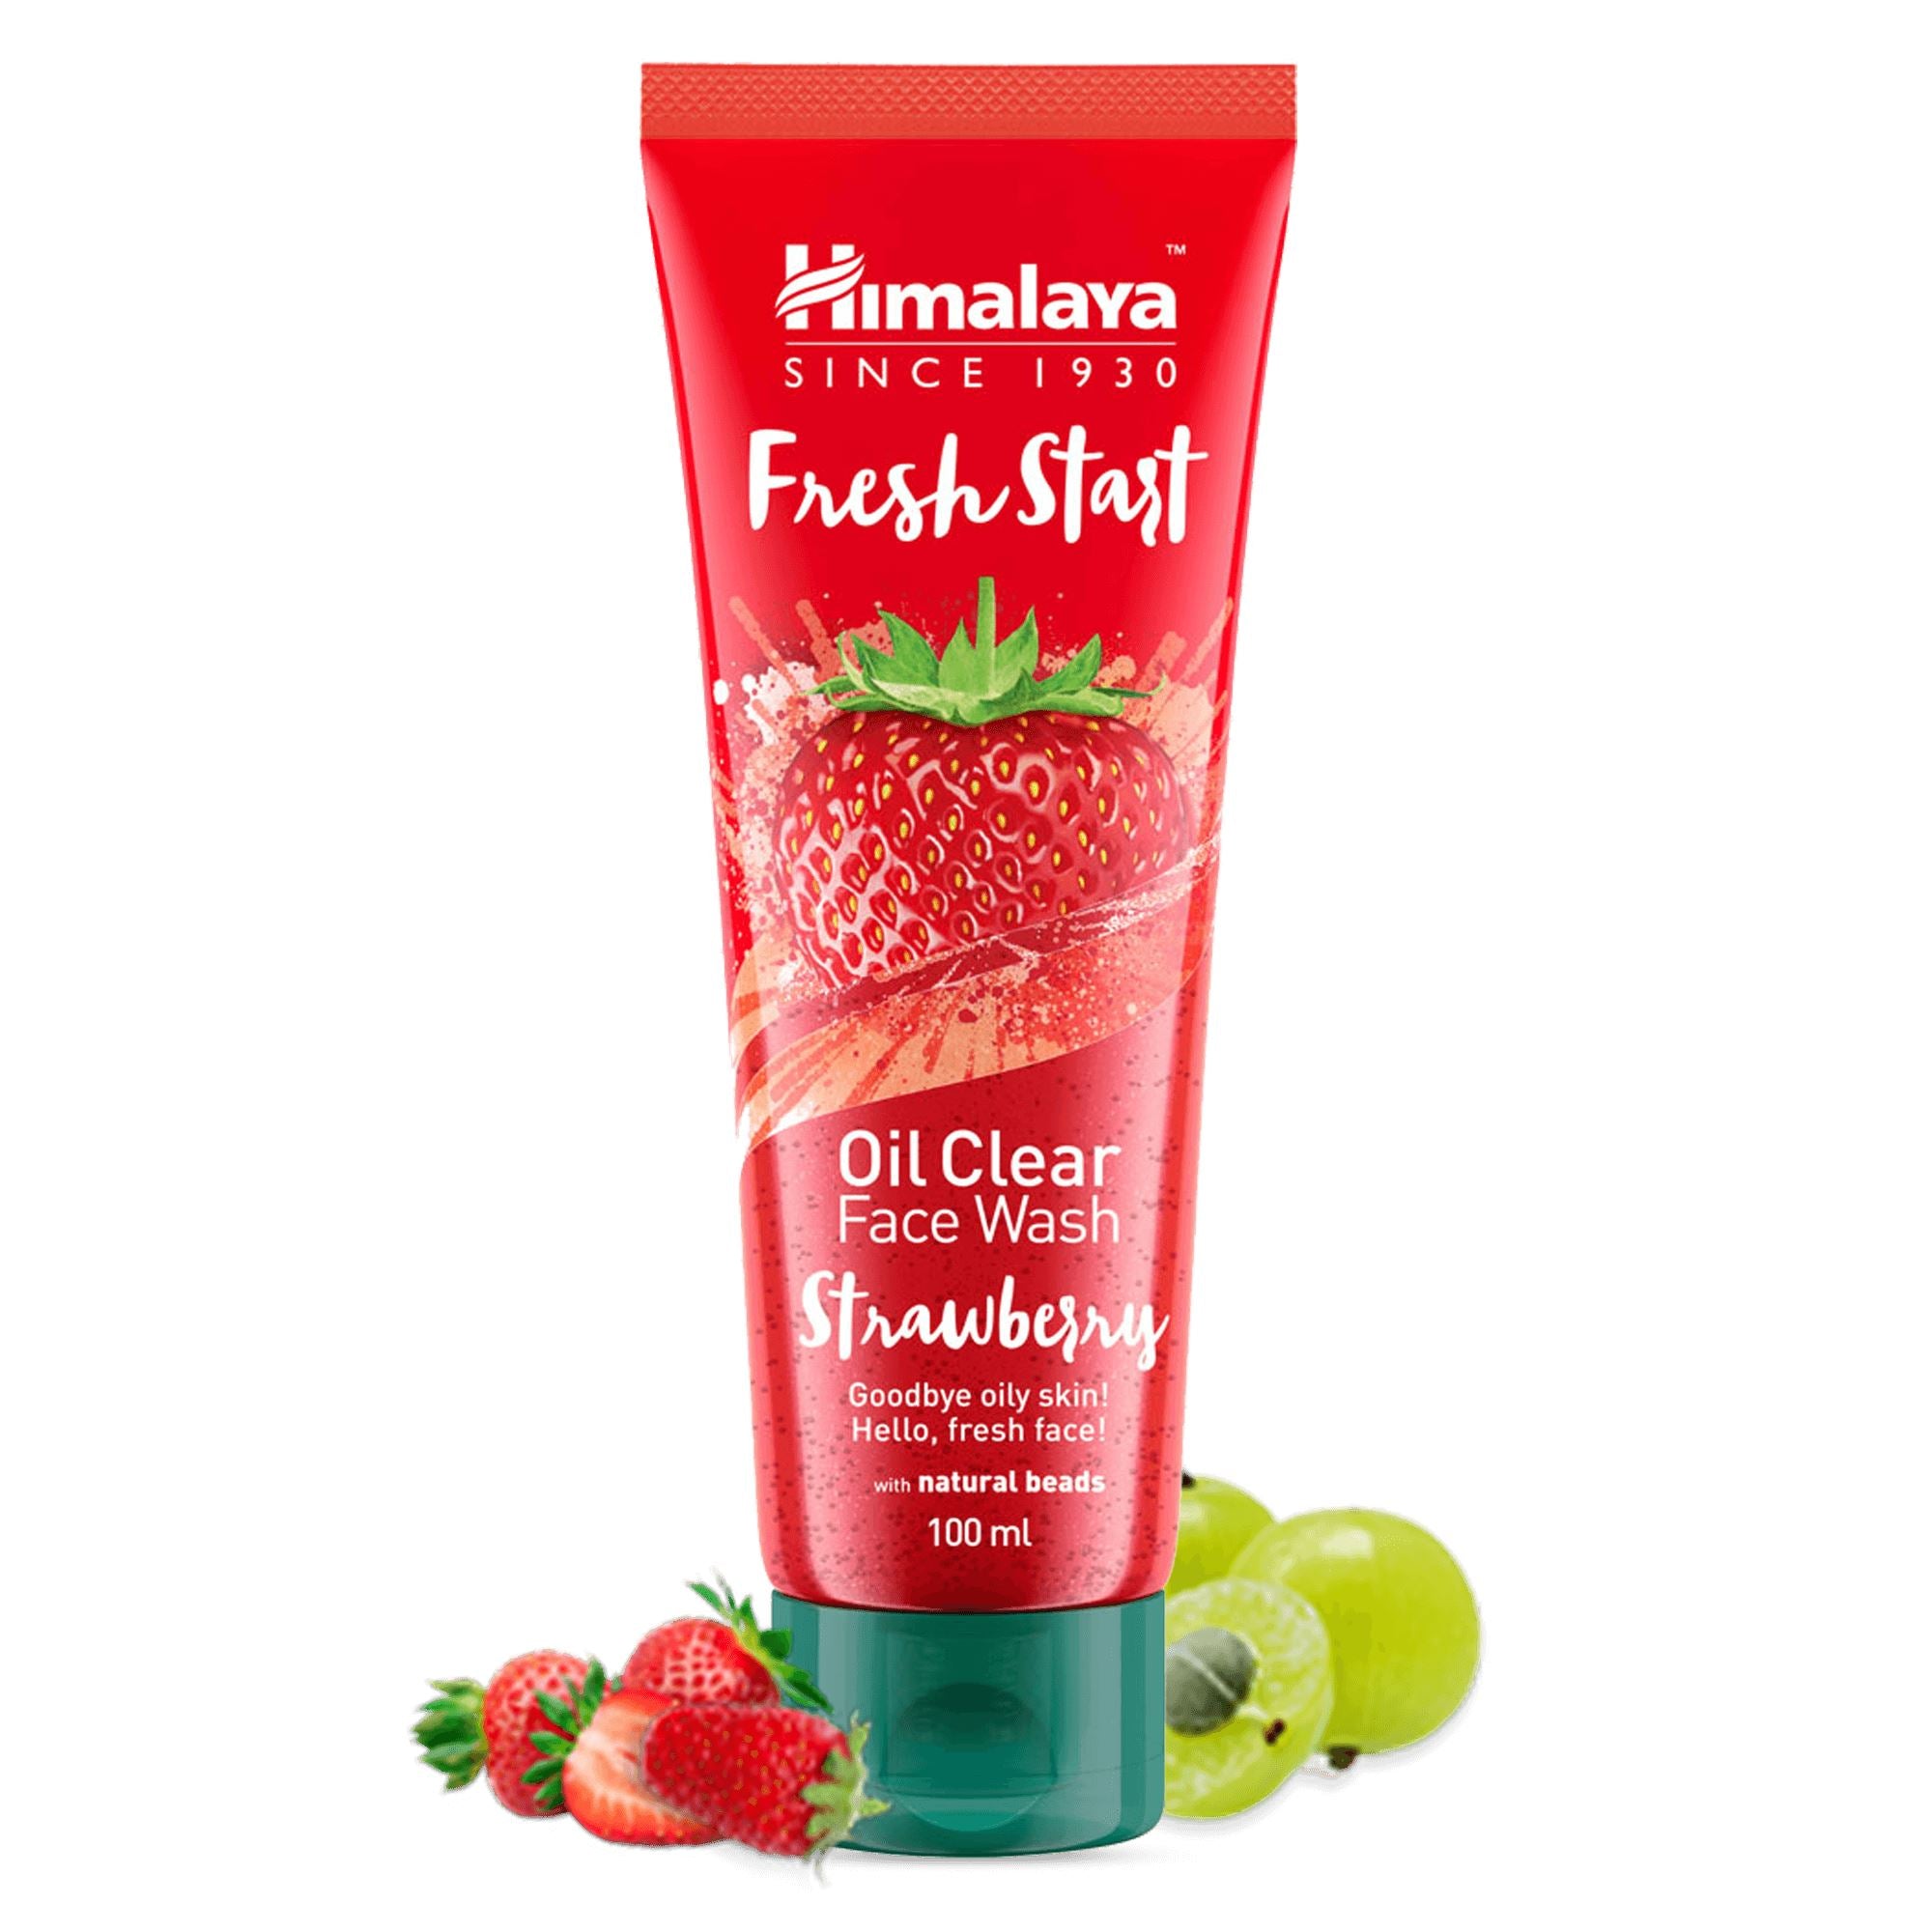 Himalaya Fresh Start Oil Clear Strawberry Face Wash - Helps remove excess oil, dirt, and impurities